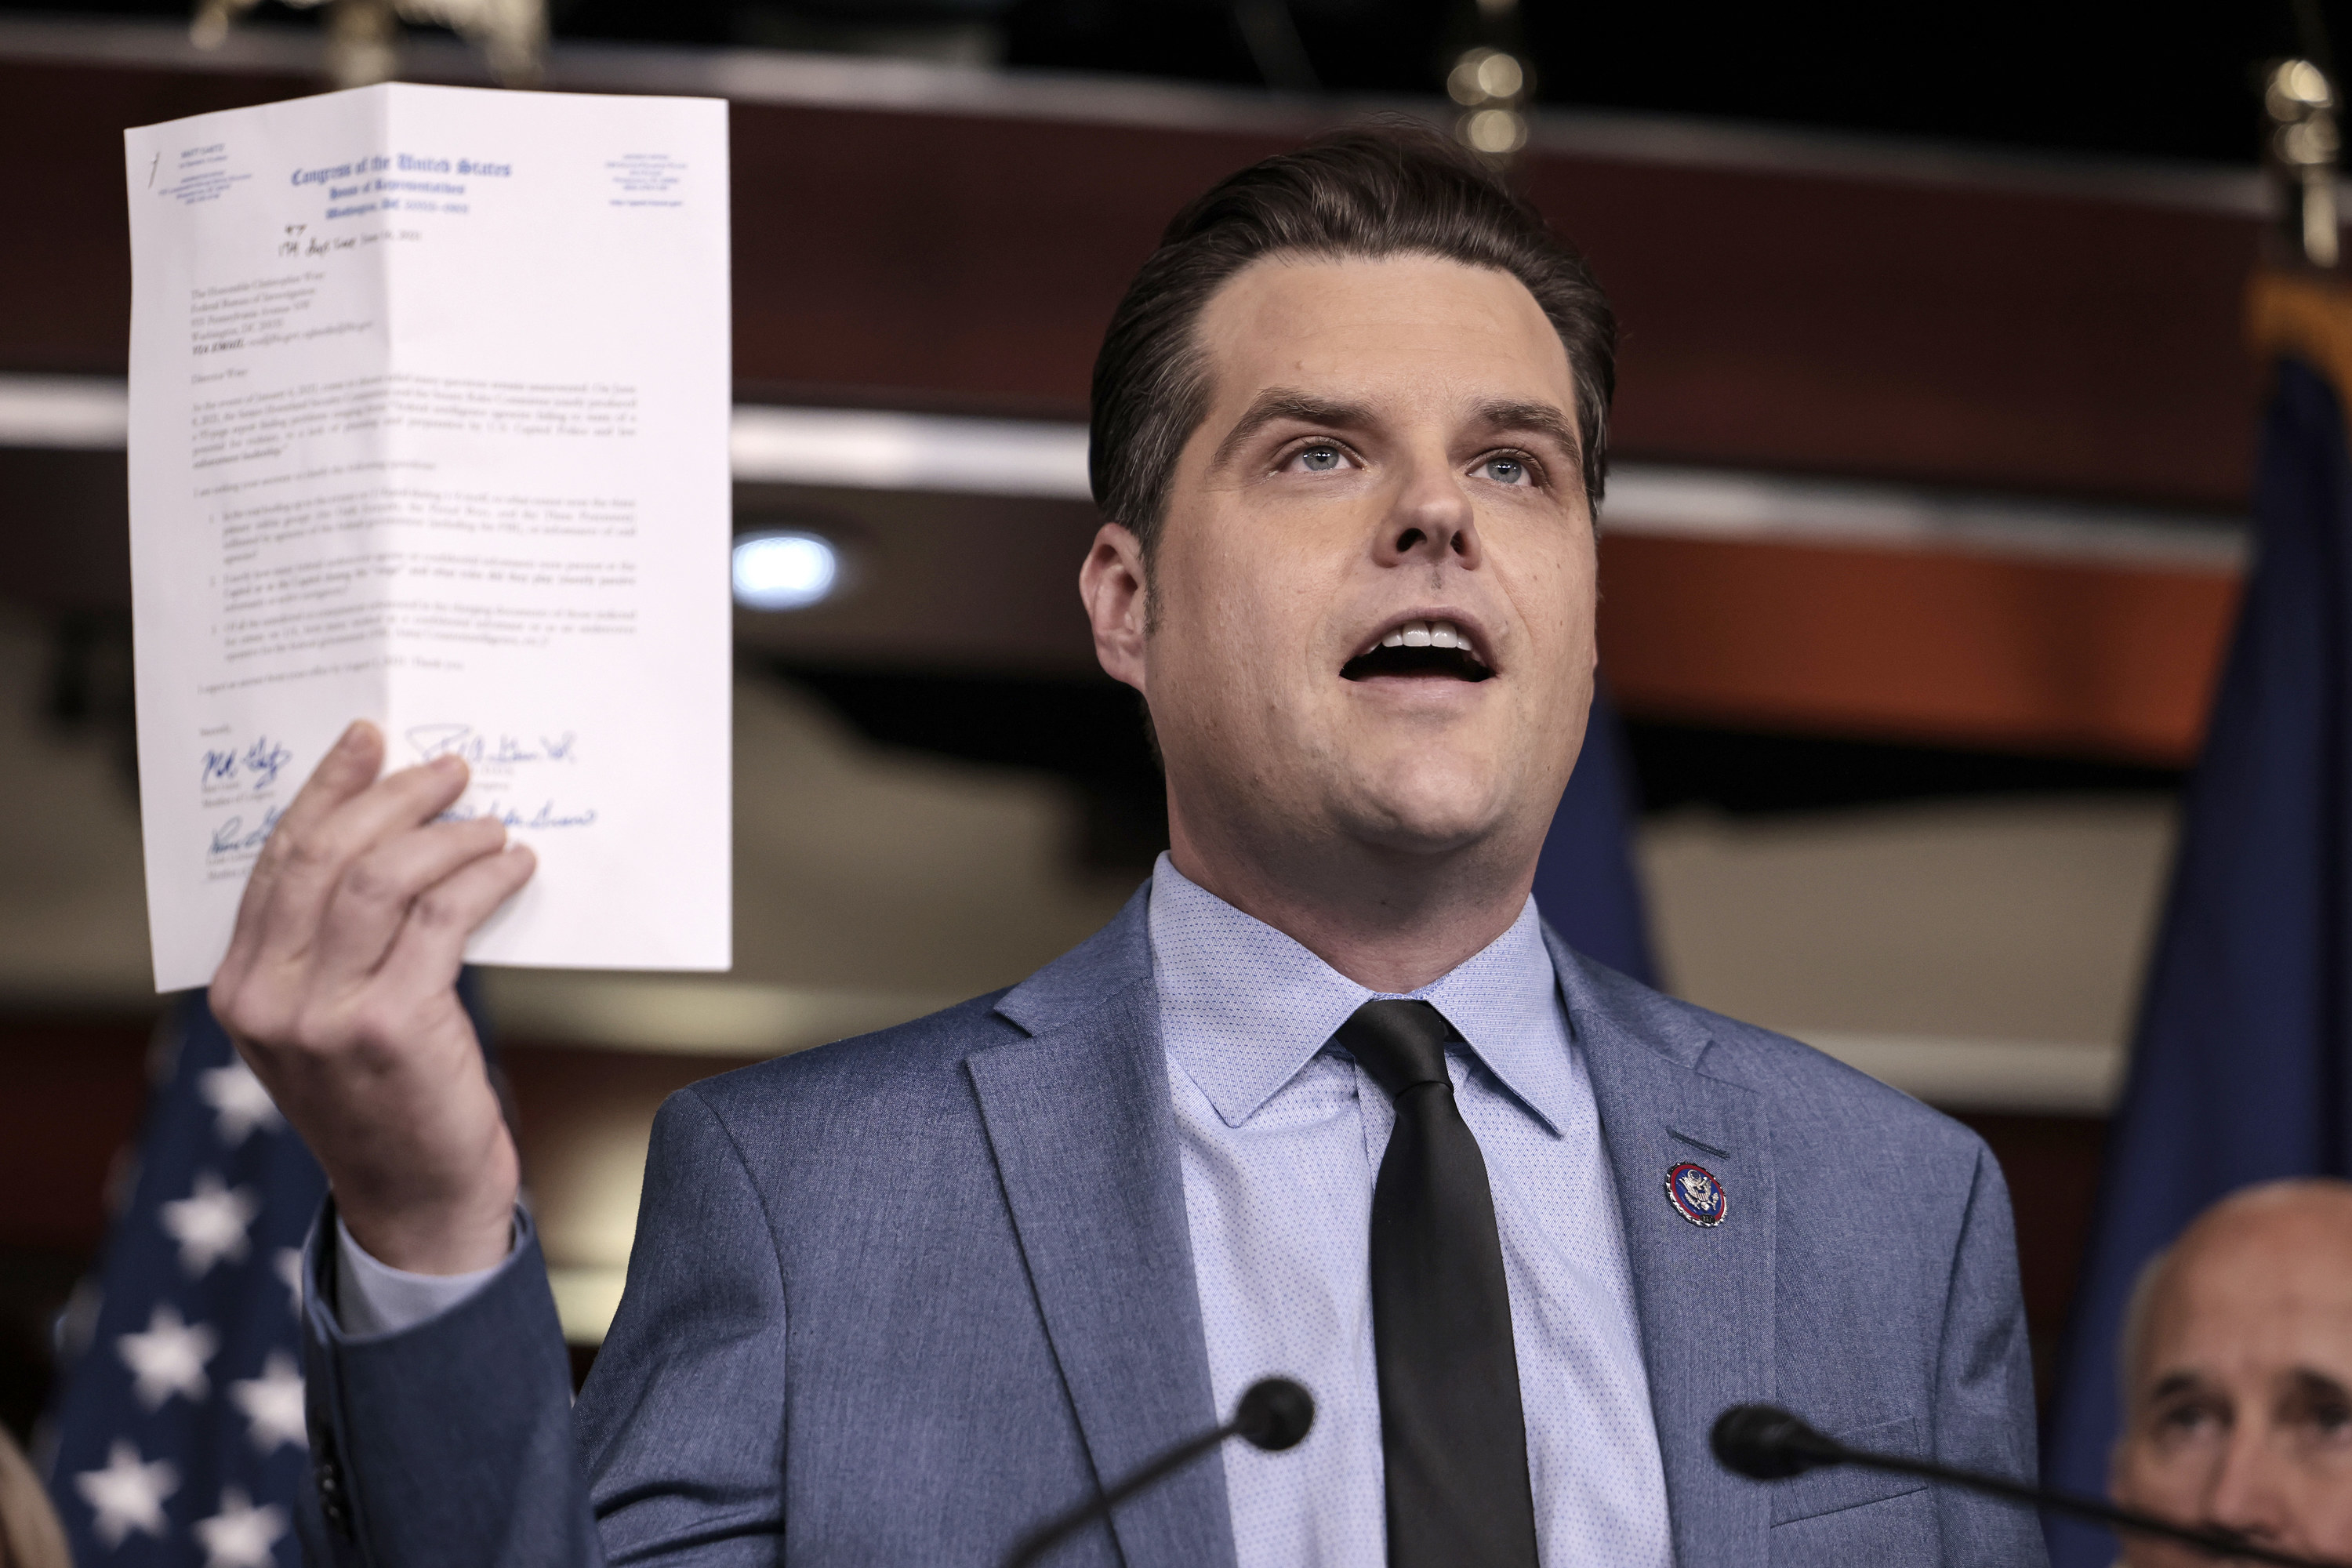 Matt Gaetz holding up a paper in a press conference while talking about the mistreatment of insurrection defendants in jail